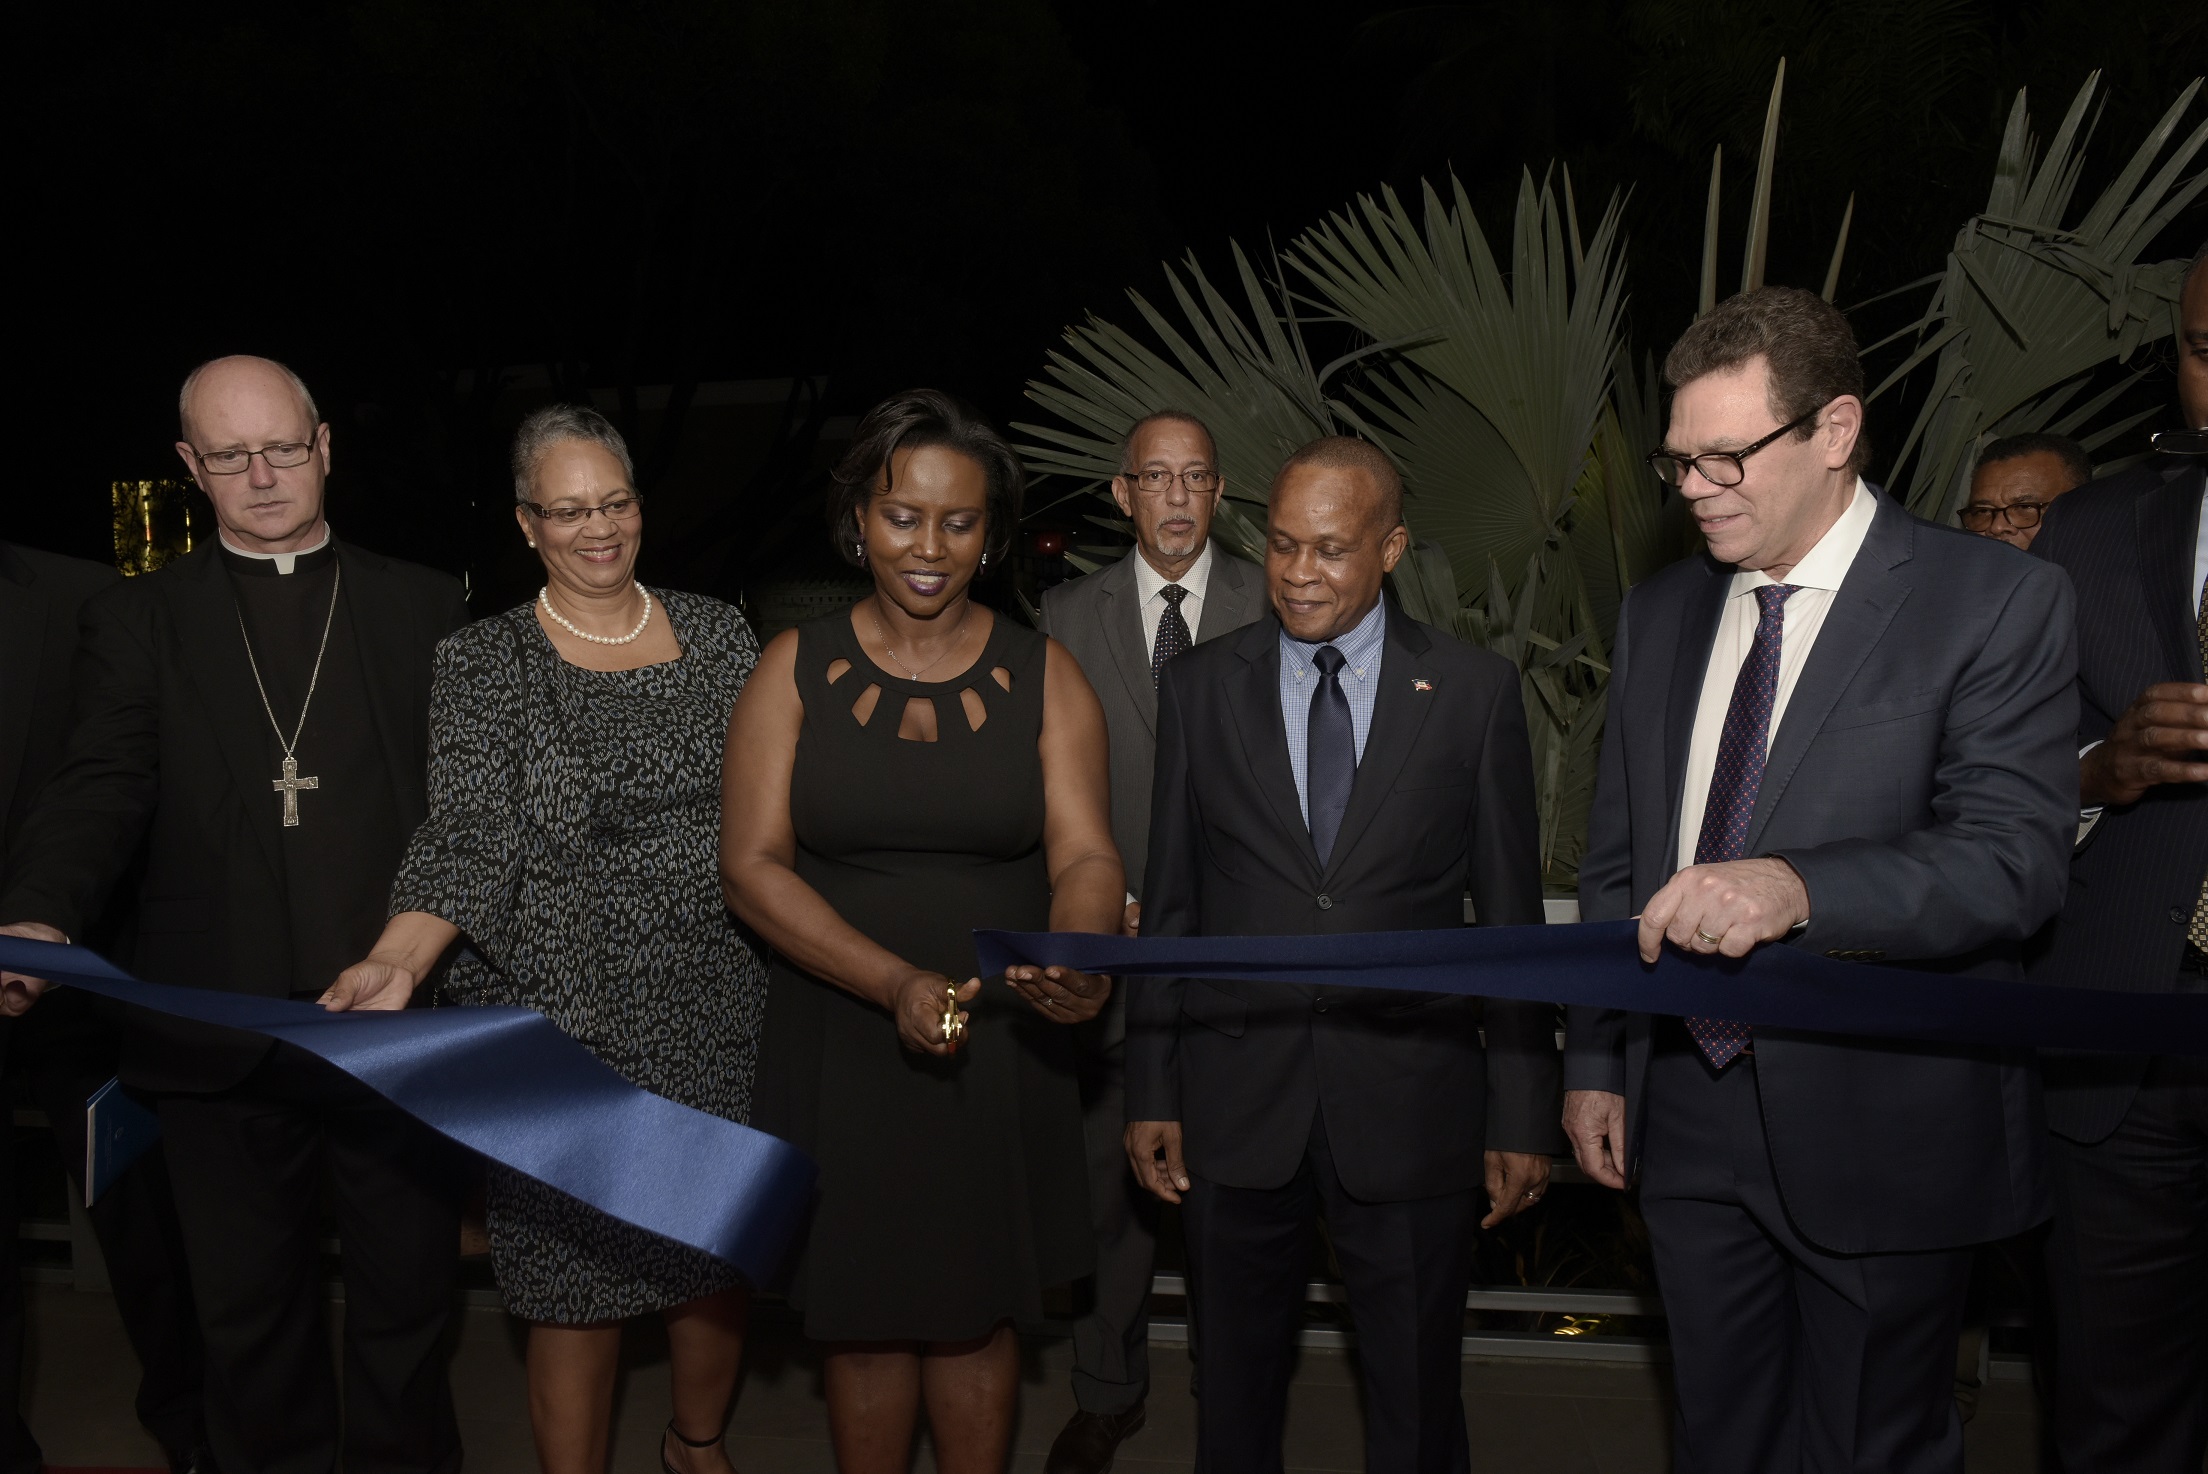 Left to right – Apostolic Nuncio, Eugène Nugent; CDB Vice-President (Operations), Monica La Bennett; First Lady of Haiti, Her Excellency Martine Moïse; Darrell Theobalds, Manager, Administrative Services Unit; Minister of the Economy and Finance, His Excellency Ronald Décembre and President of CDB, Dr. William Warren Smith, during the ribbon-cutting ceremony in Haiti on September 21, 2018.